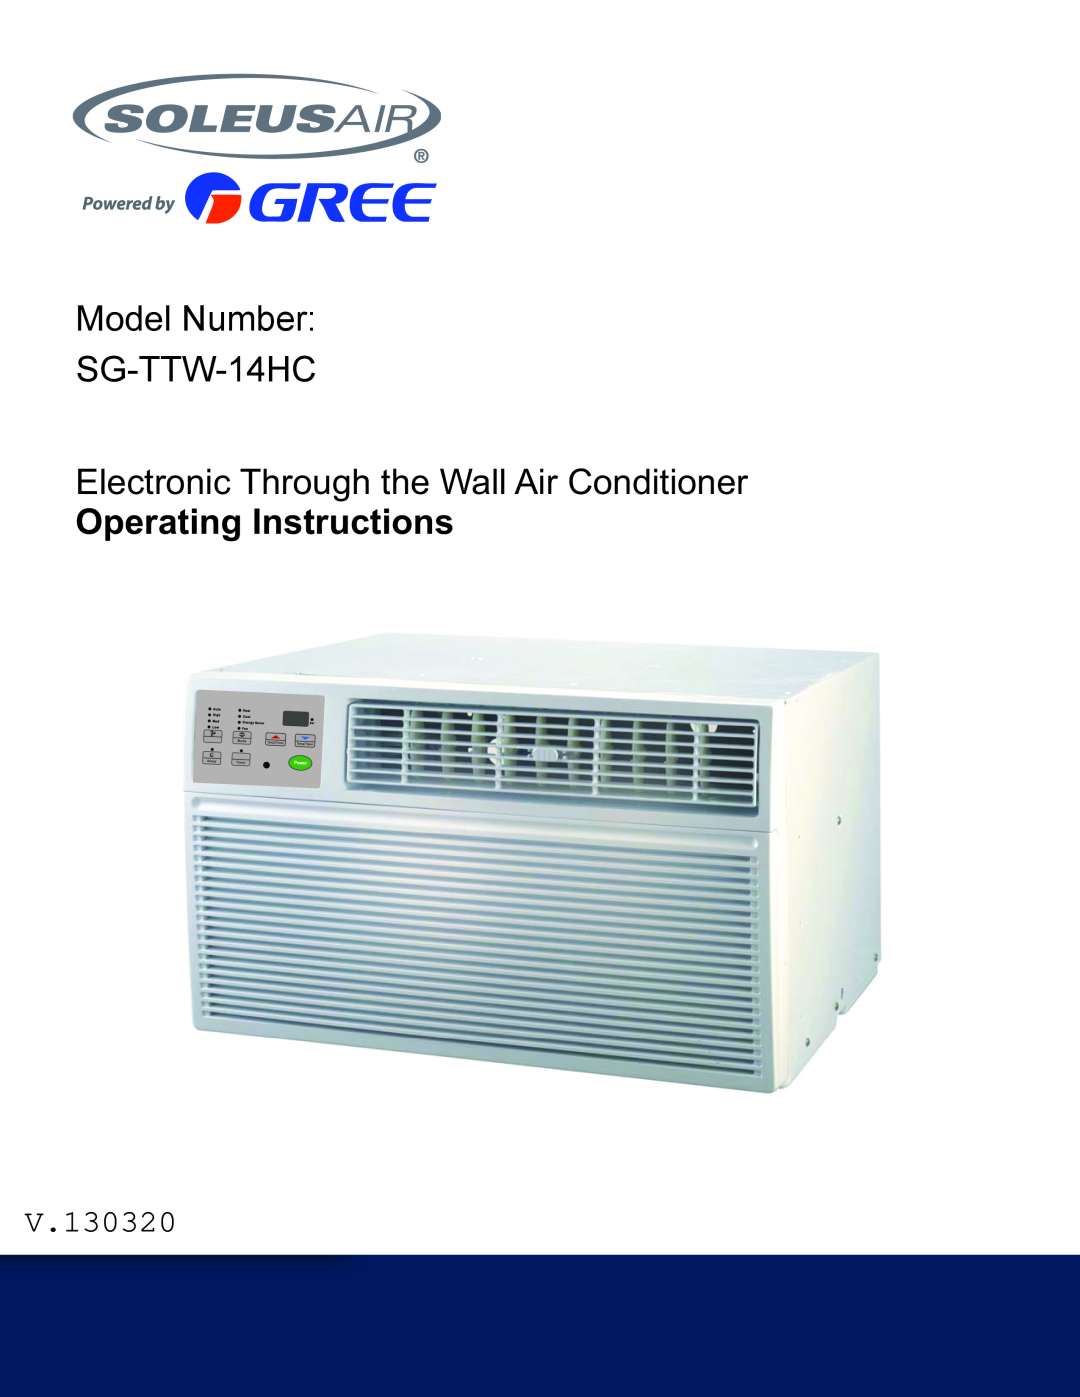 Soleus Air manual Model Number SG-TTW-14HC, Electronic Through the Wall Air Conditioner, Operating Instructions 